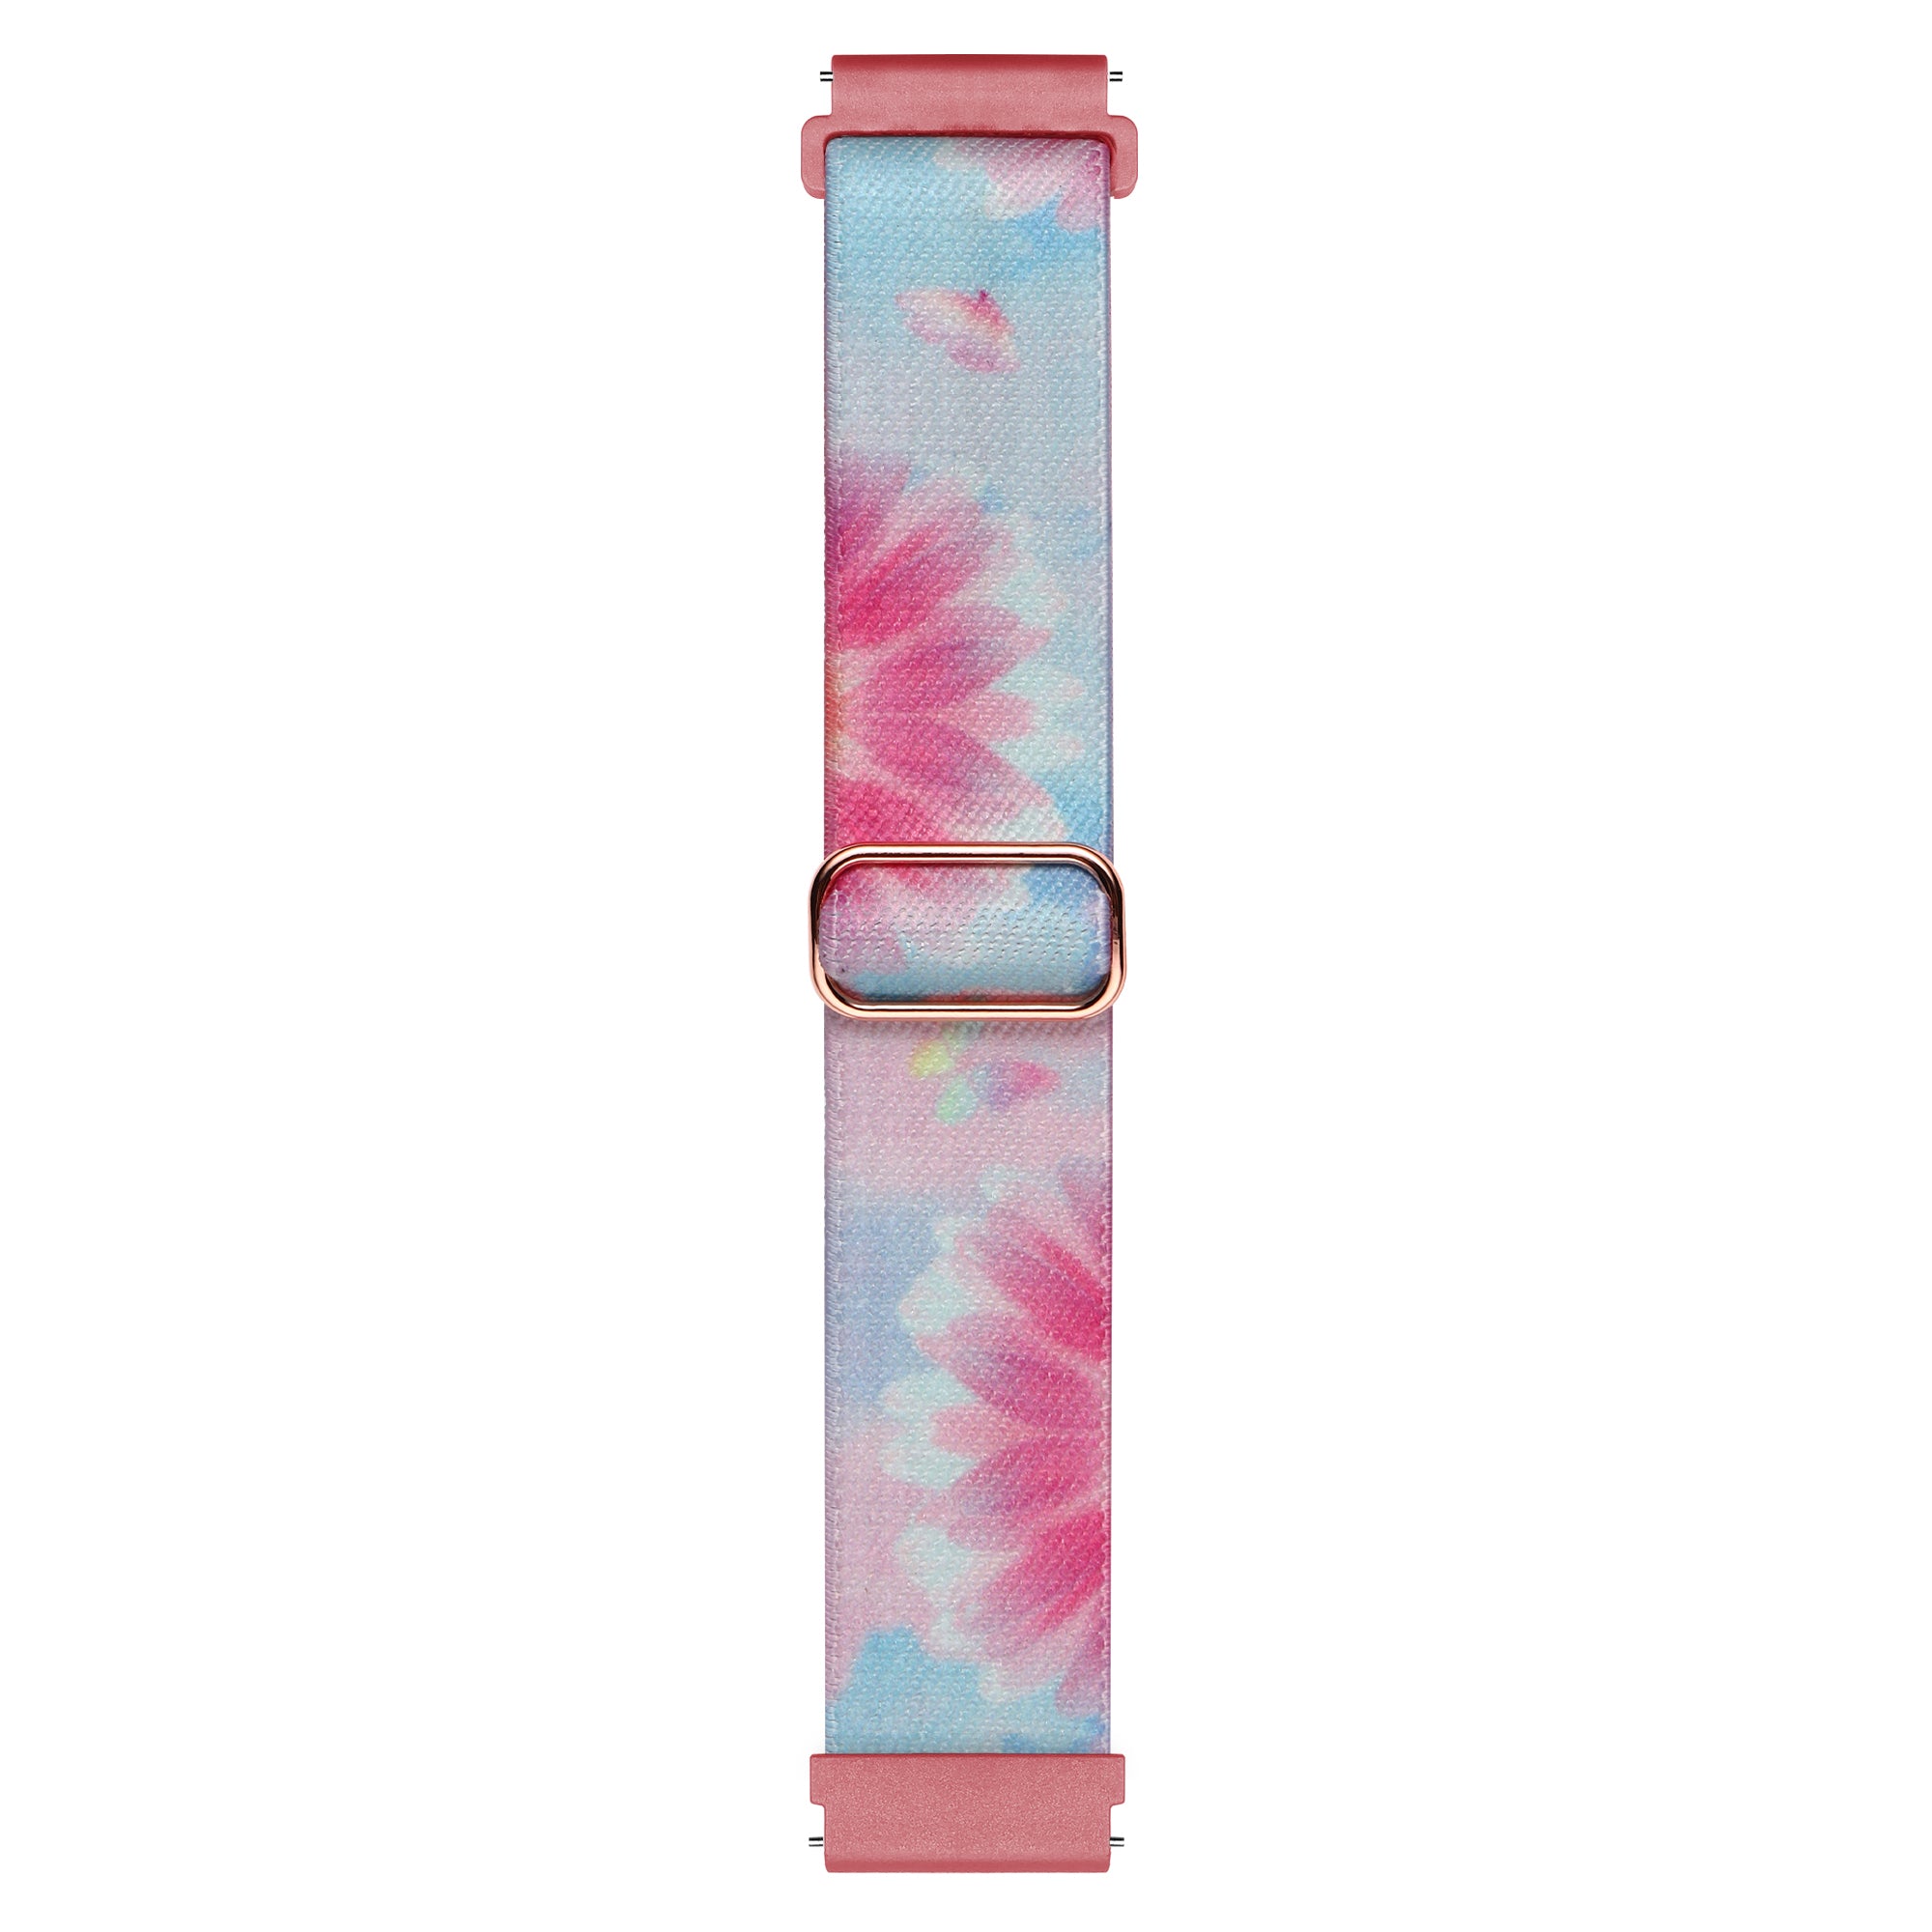 Nylon Watch Band for Coros Pace 2 / Apex 42mm , 20mm Pattern Adjustable Braided Loop Strap - Flowers / Butterflies